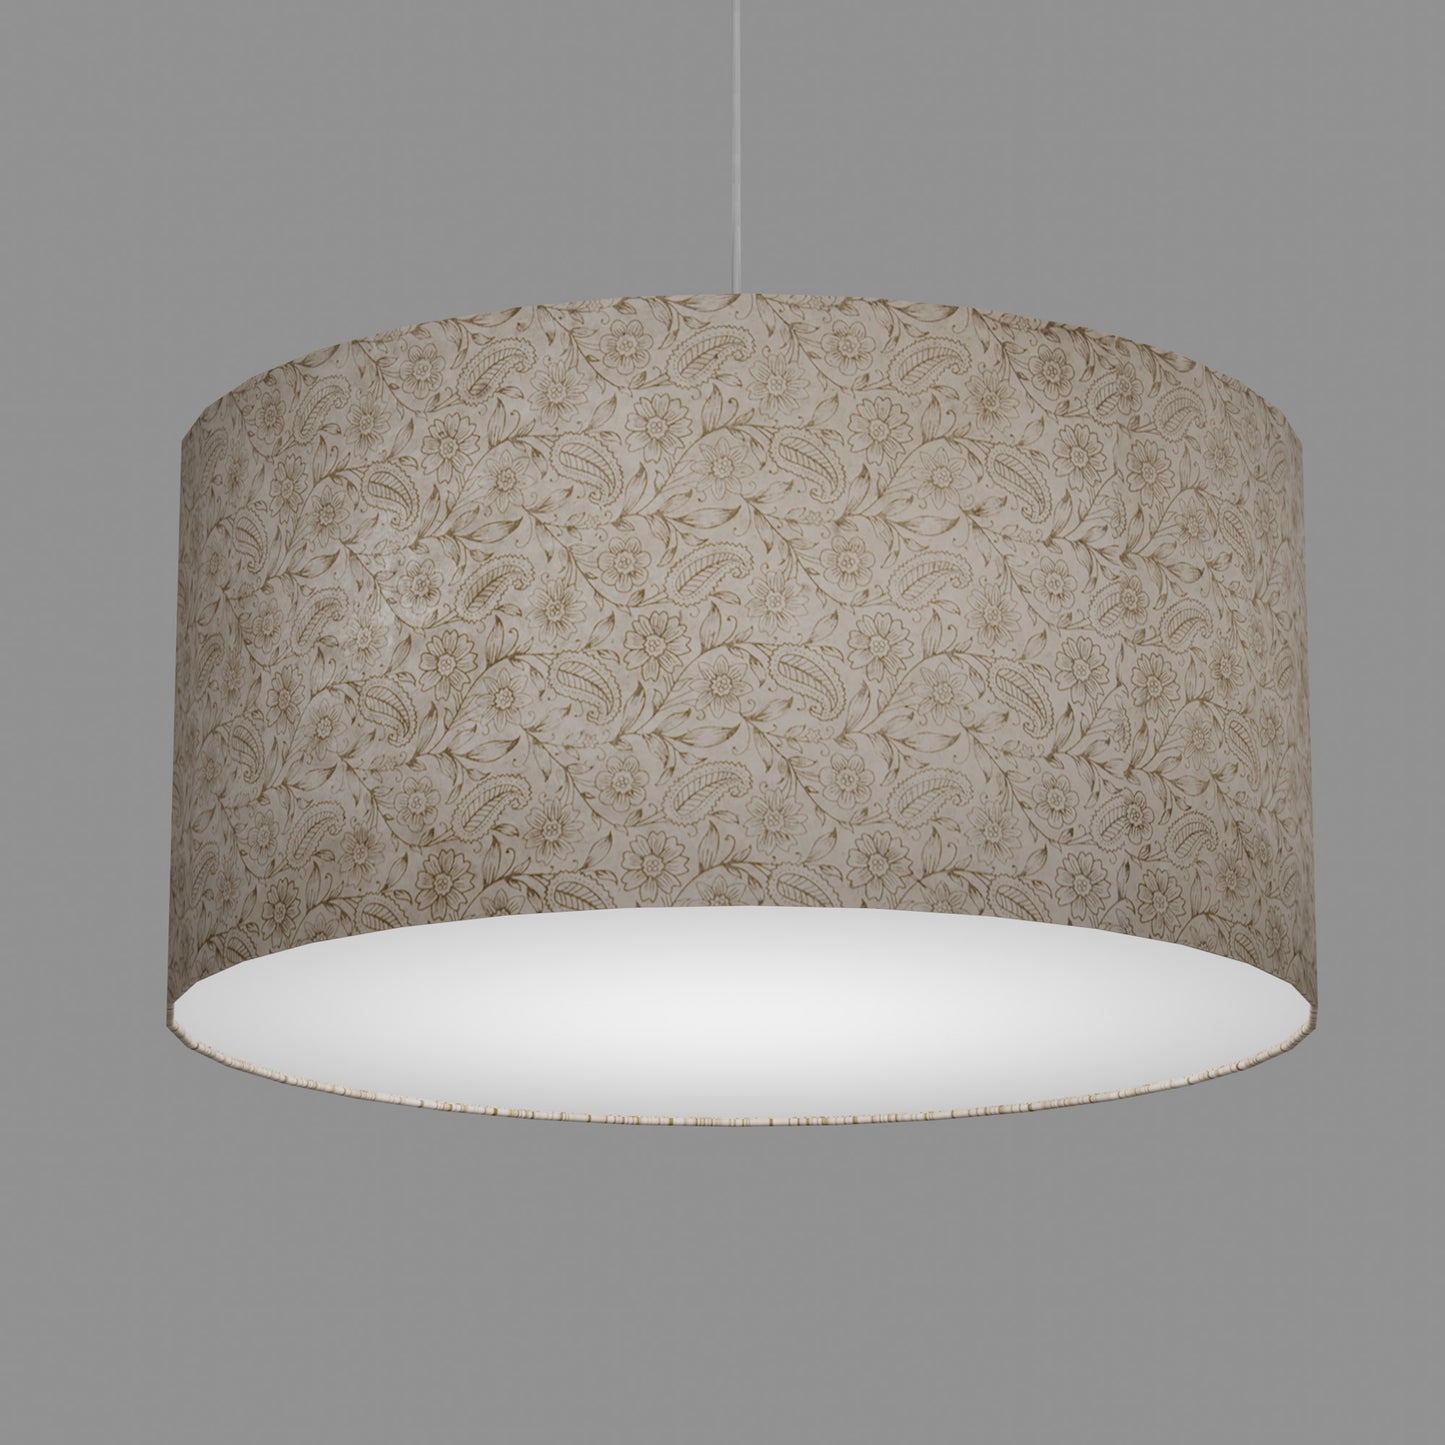 Drum Lamp Shade - P69 - Garden Gold on Natural, 60cm(d) x 30cm(h)